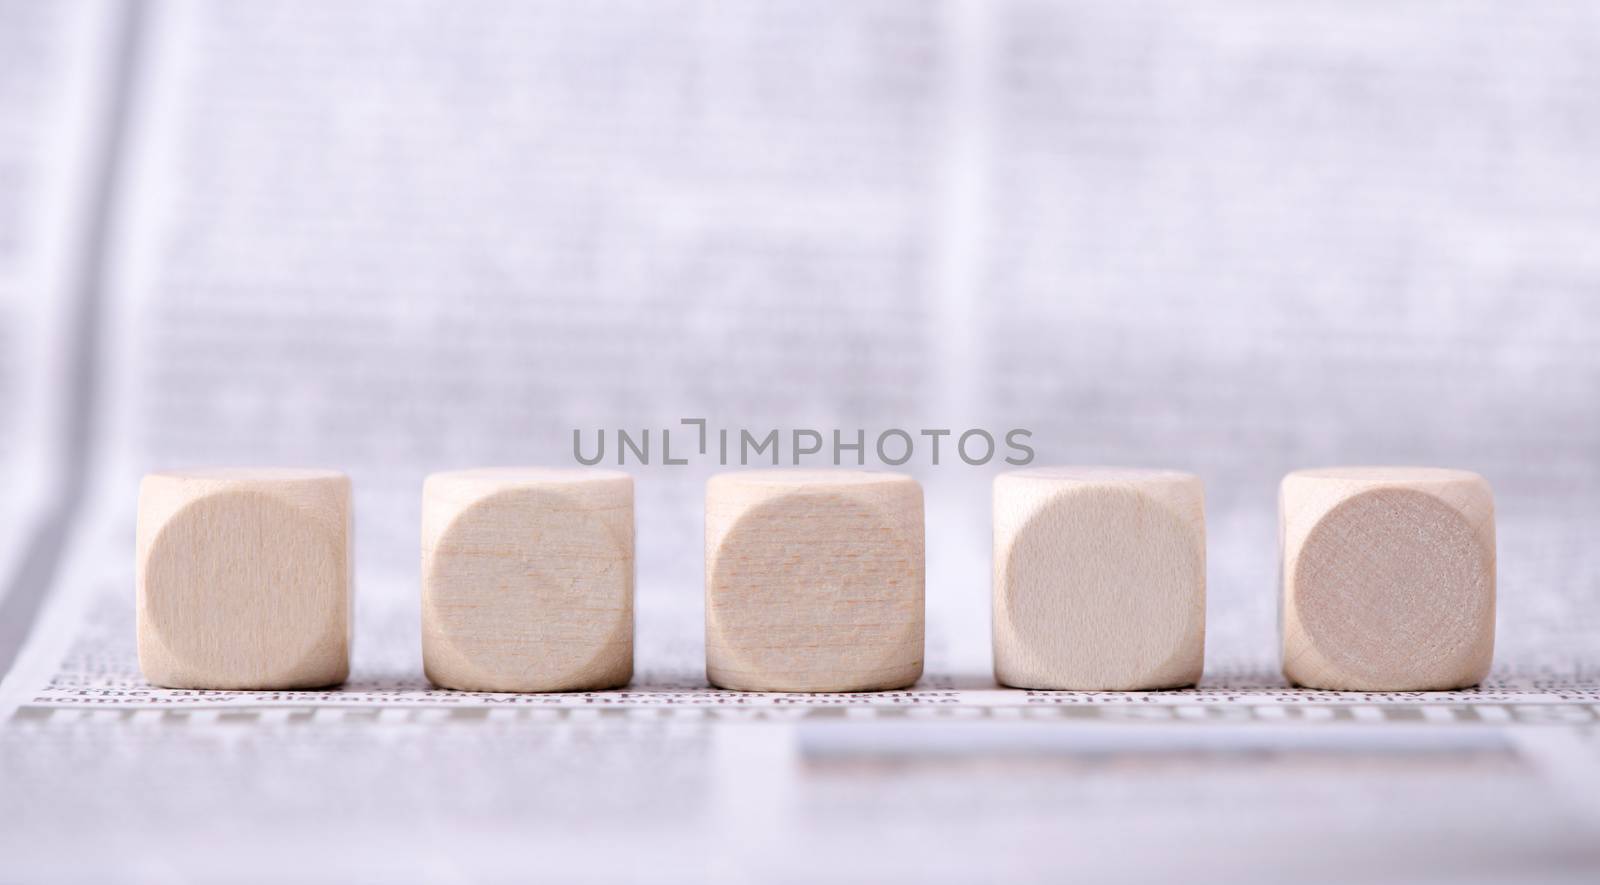 Five wooden dice you can put your text on.